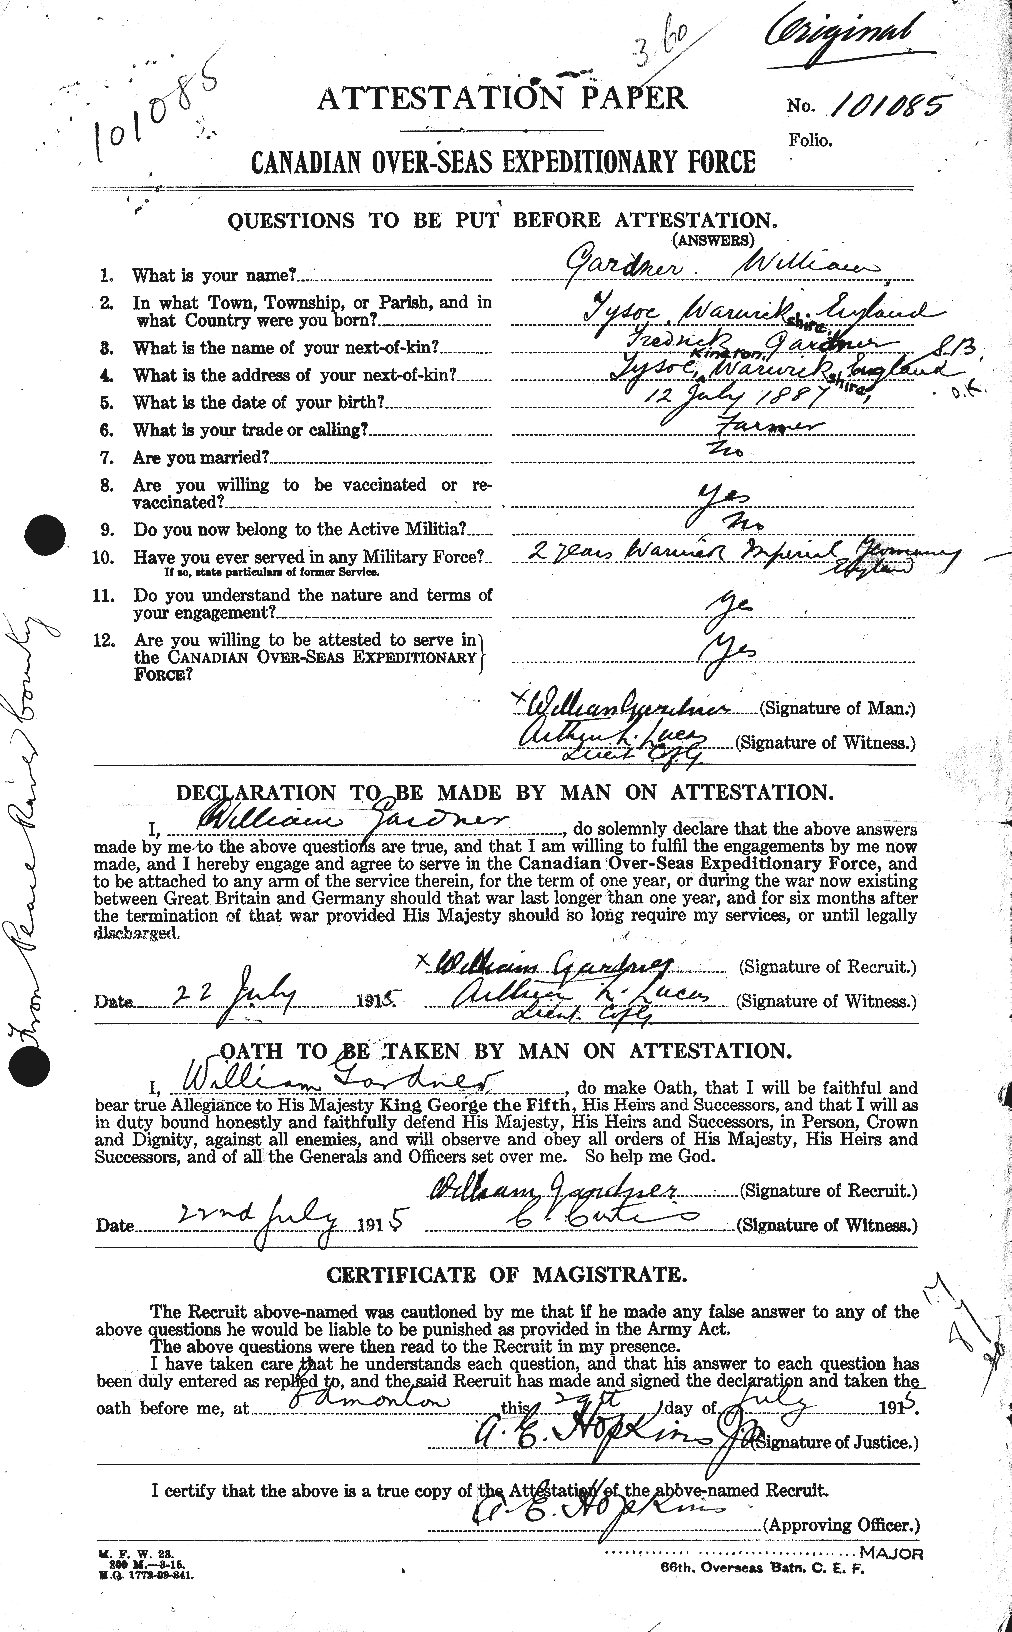 Personnel Records of the First World War - CEF 345849a